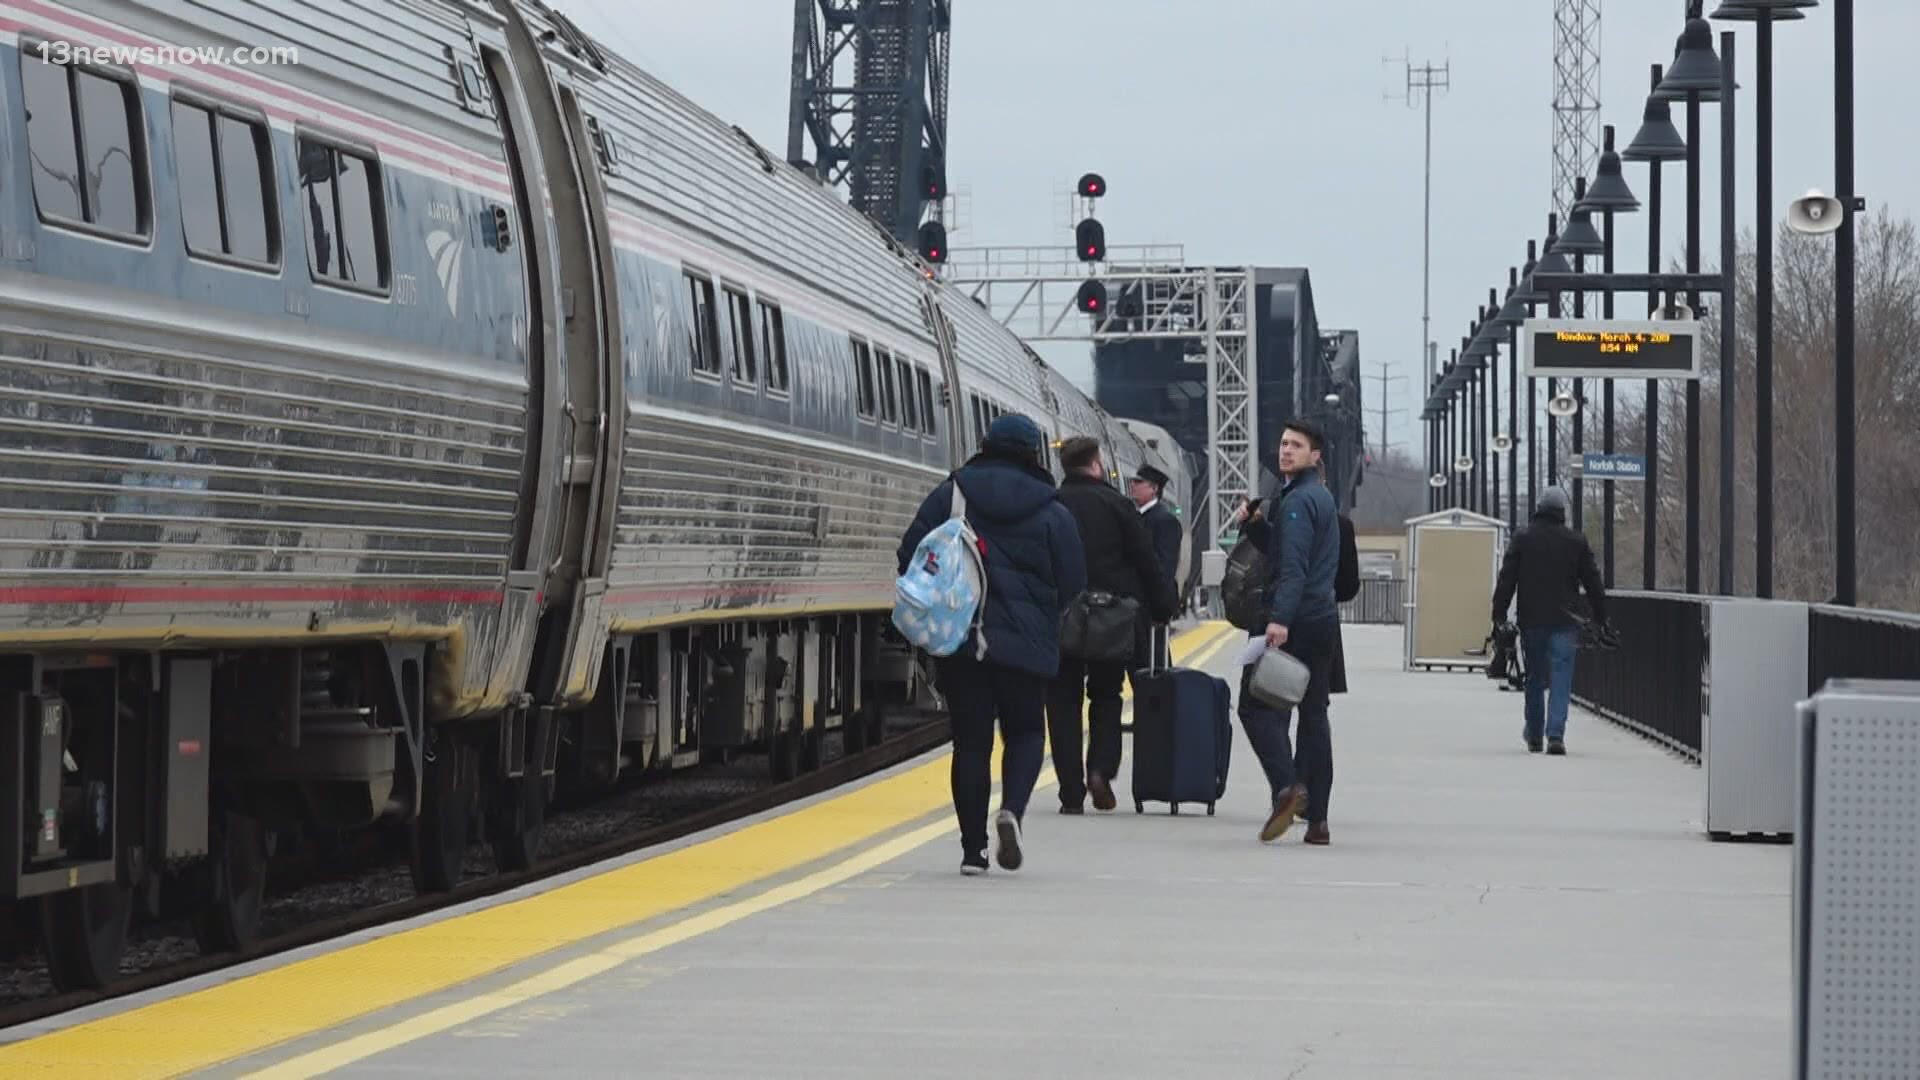 Amtrak announced it will not be running trains from VA through the south of Washington D.C. on Jan 19-20, after the recent Capitol riots caused safety concerns.